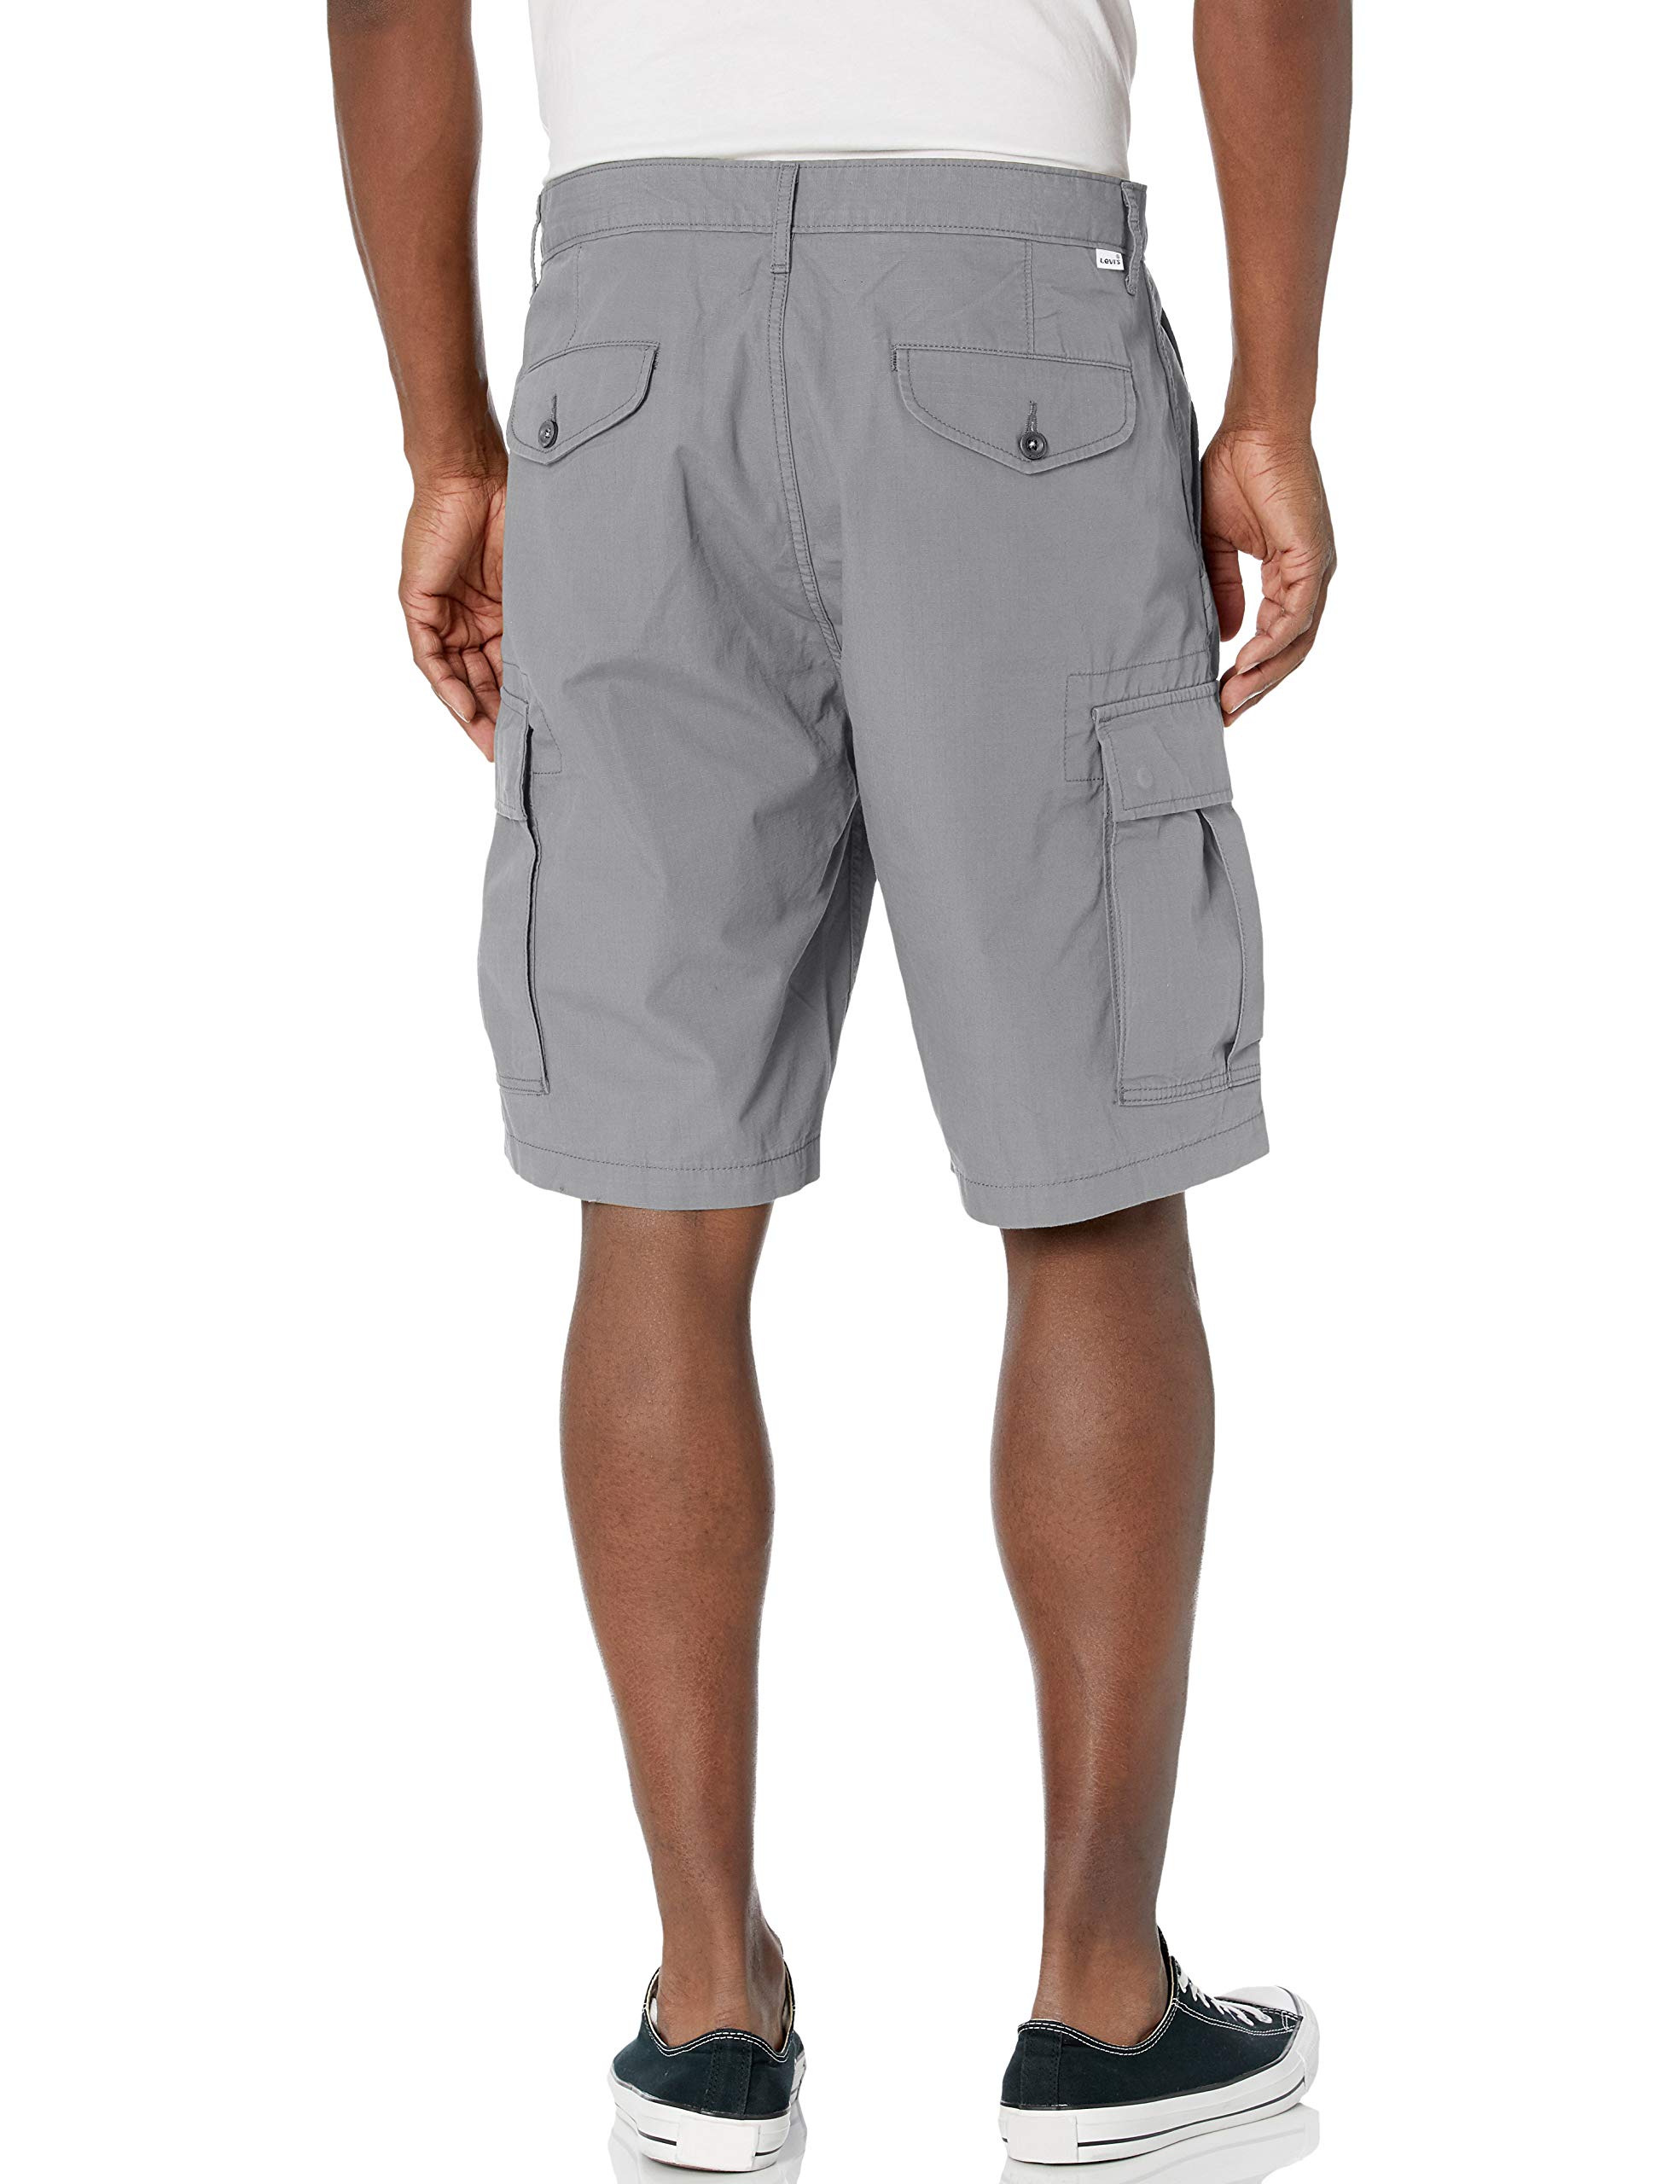 Levi's Men's Carrier Cargo Shorts (Also Available in Big & Tall)